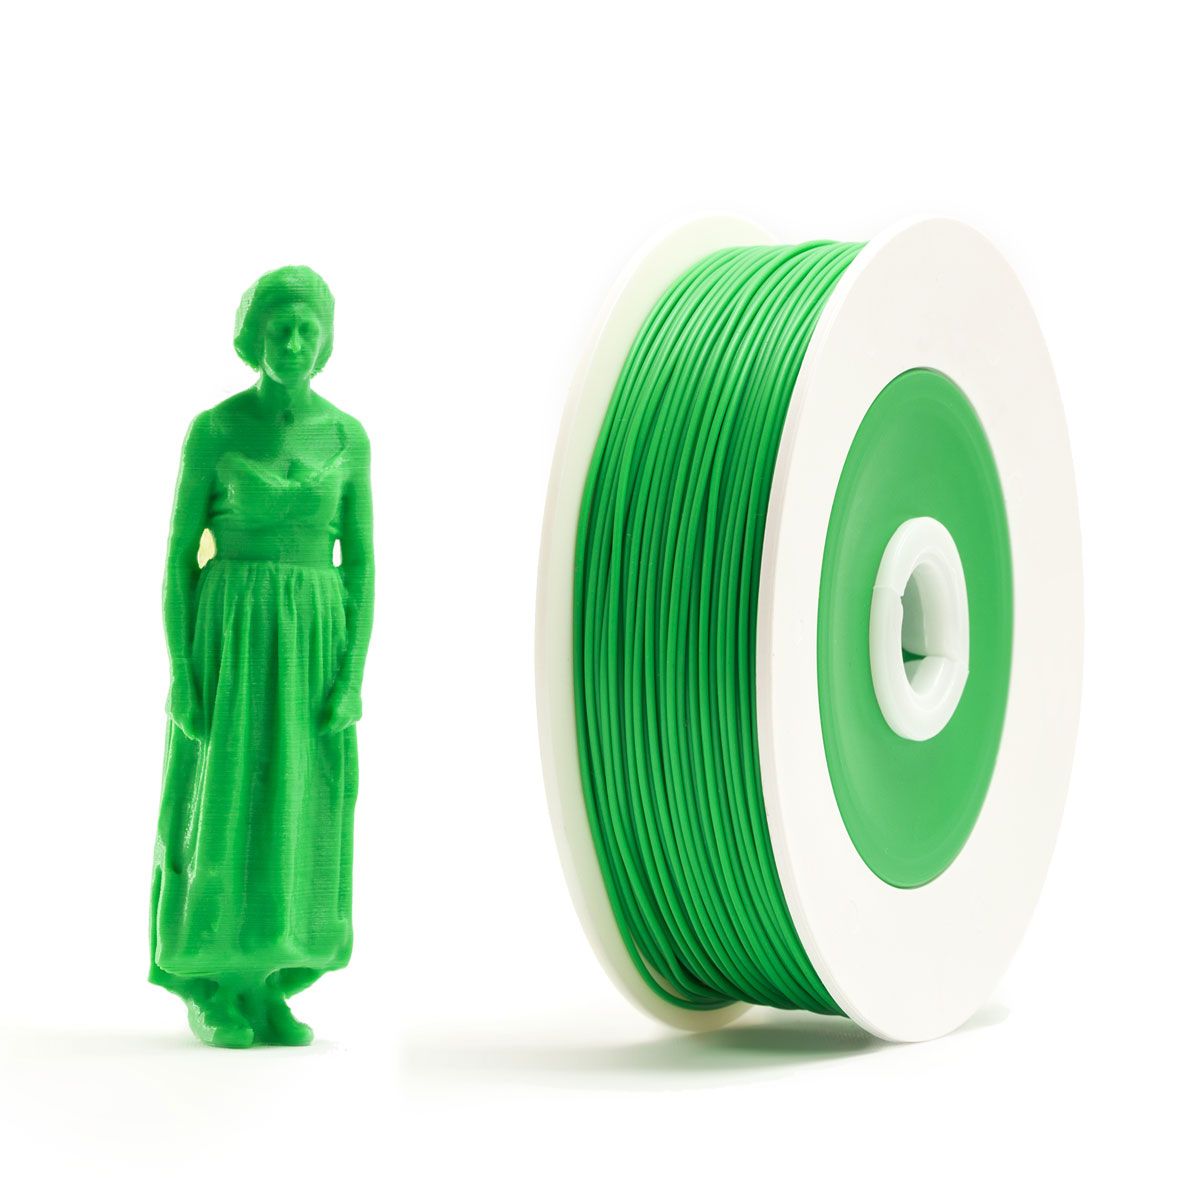 Pair of PLA spools: Yellow and Green